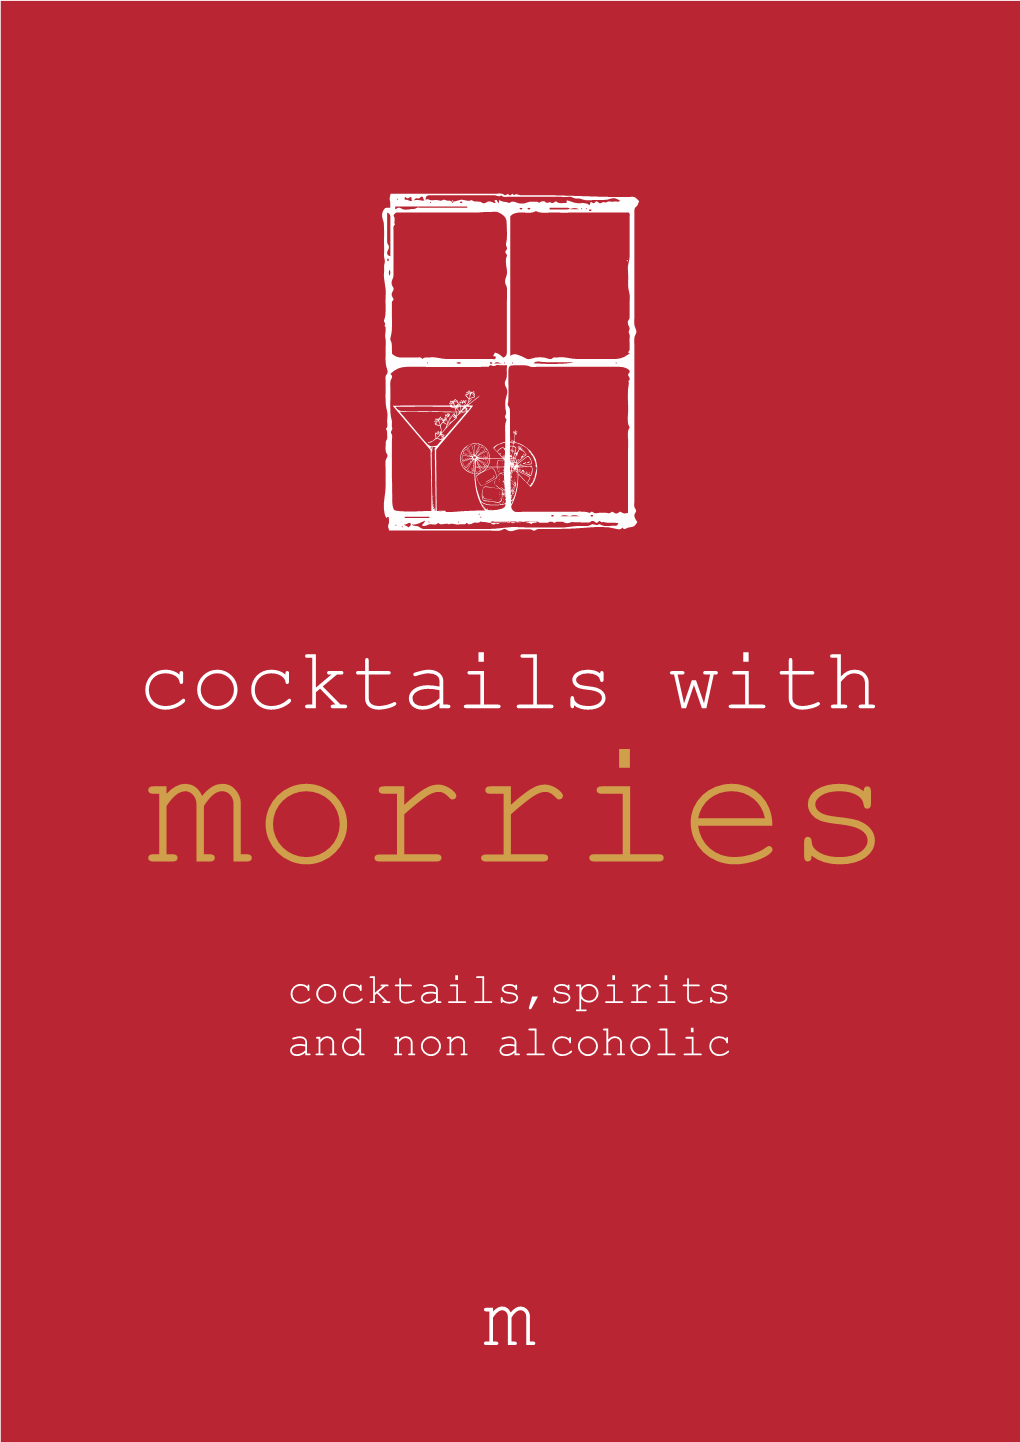 Cocktails with M